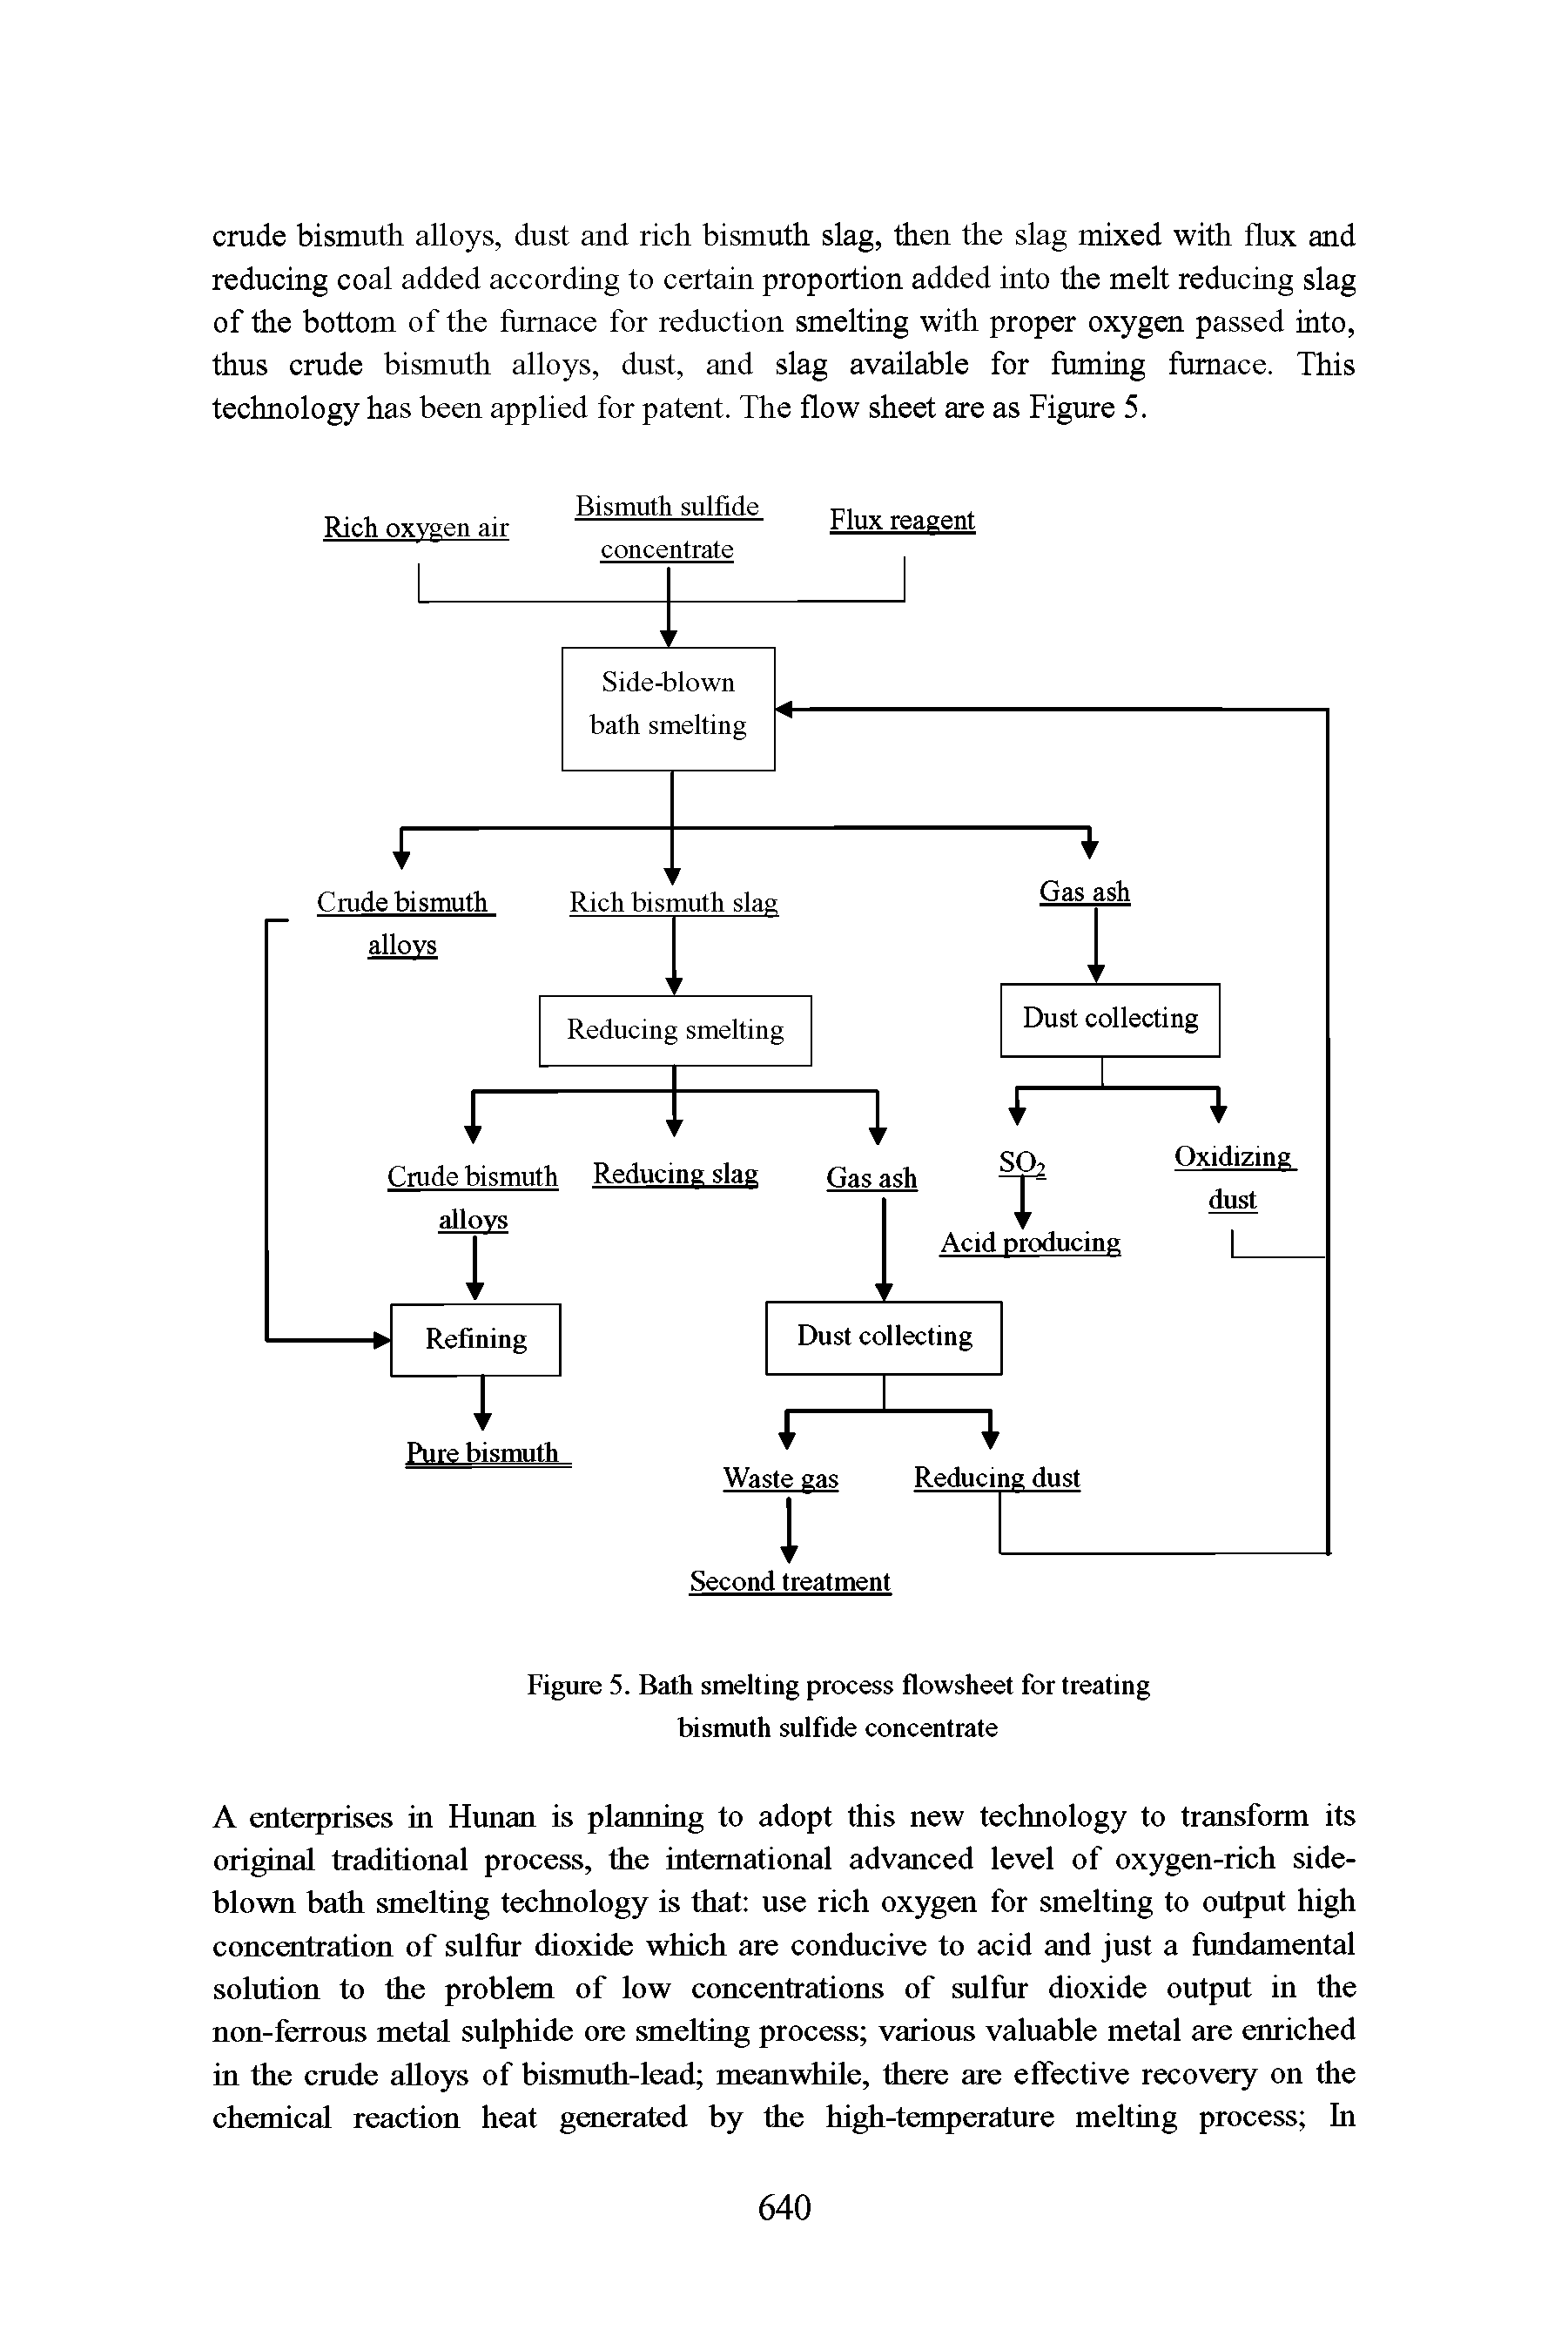 Figure 5. Bath smelting process flowsheet for treating bismuth sulfide concentrate...